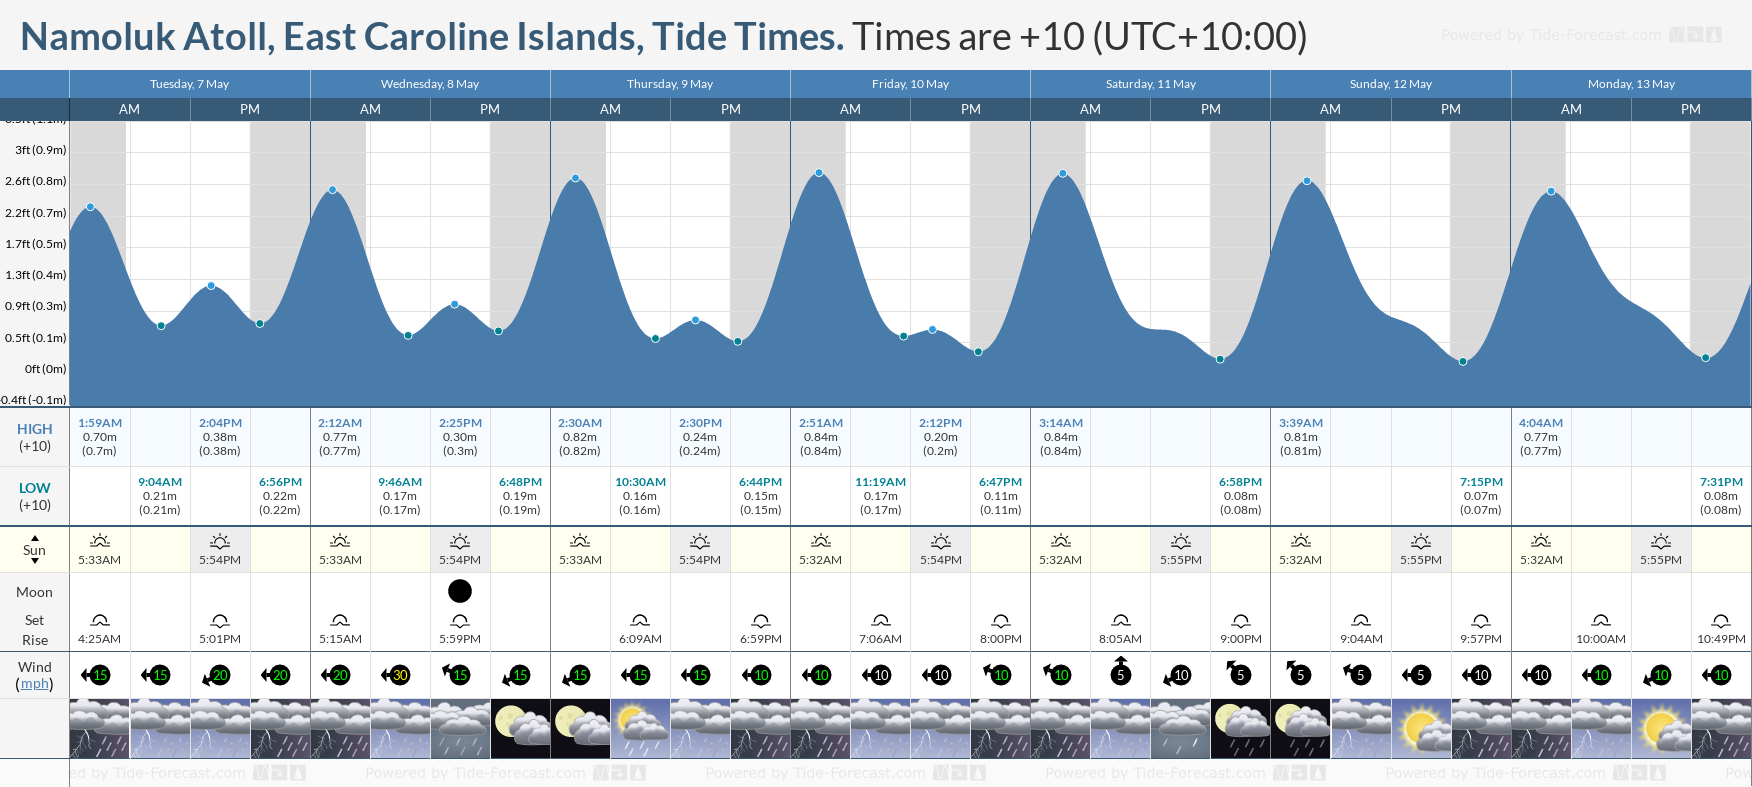 Namoluk Atoll, East Caroline Islands Tide Chart including high and low tide tide times for the next 7 days